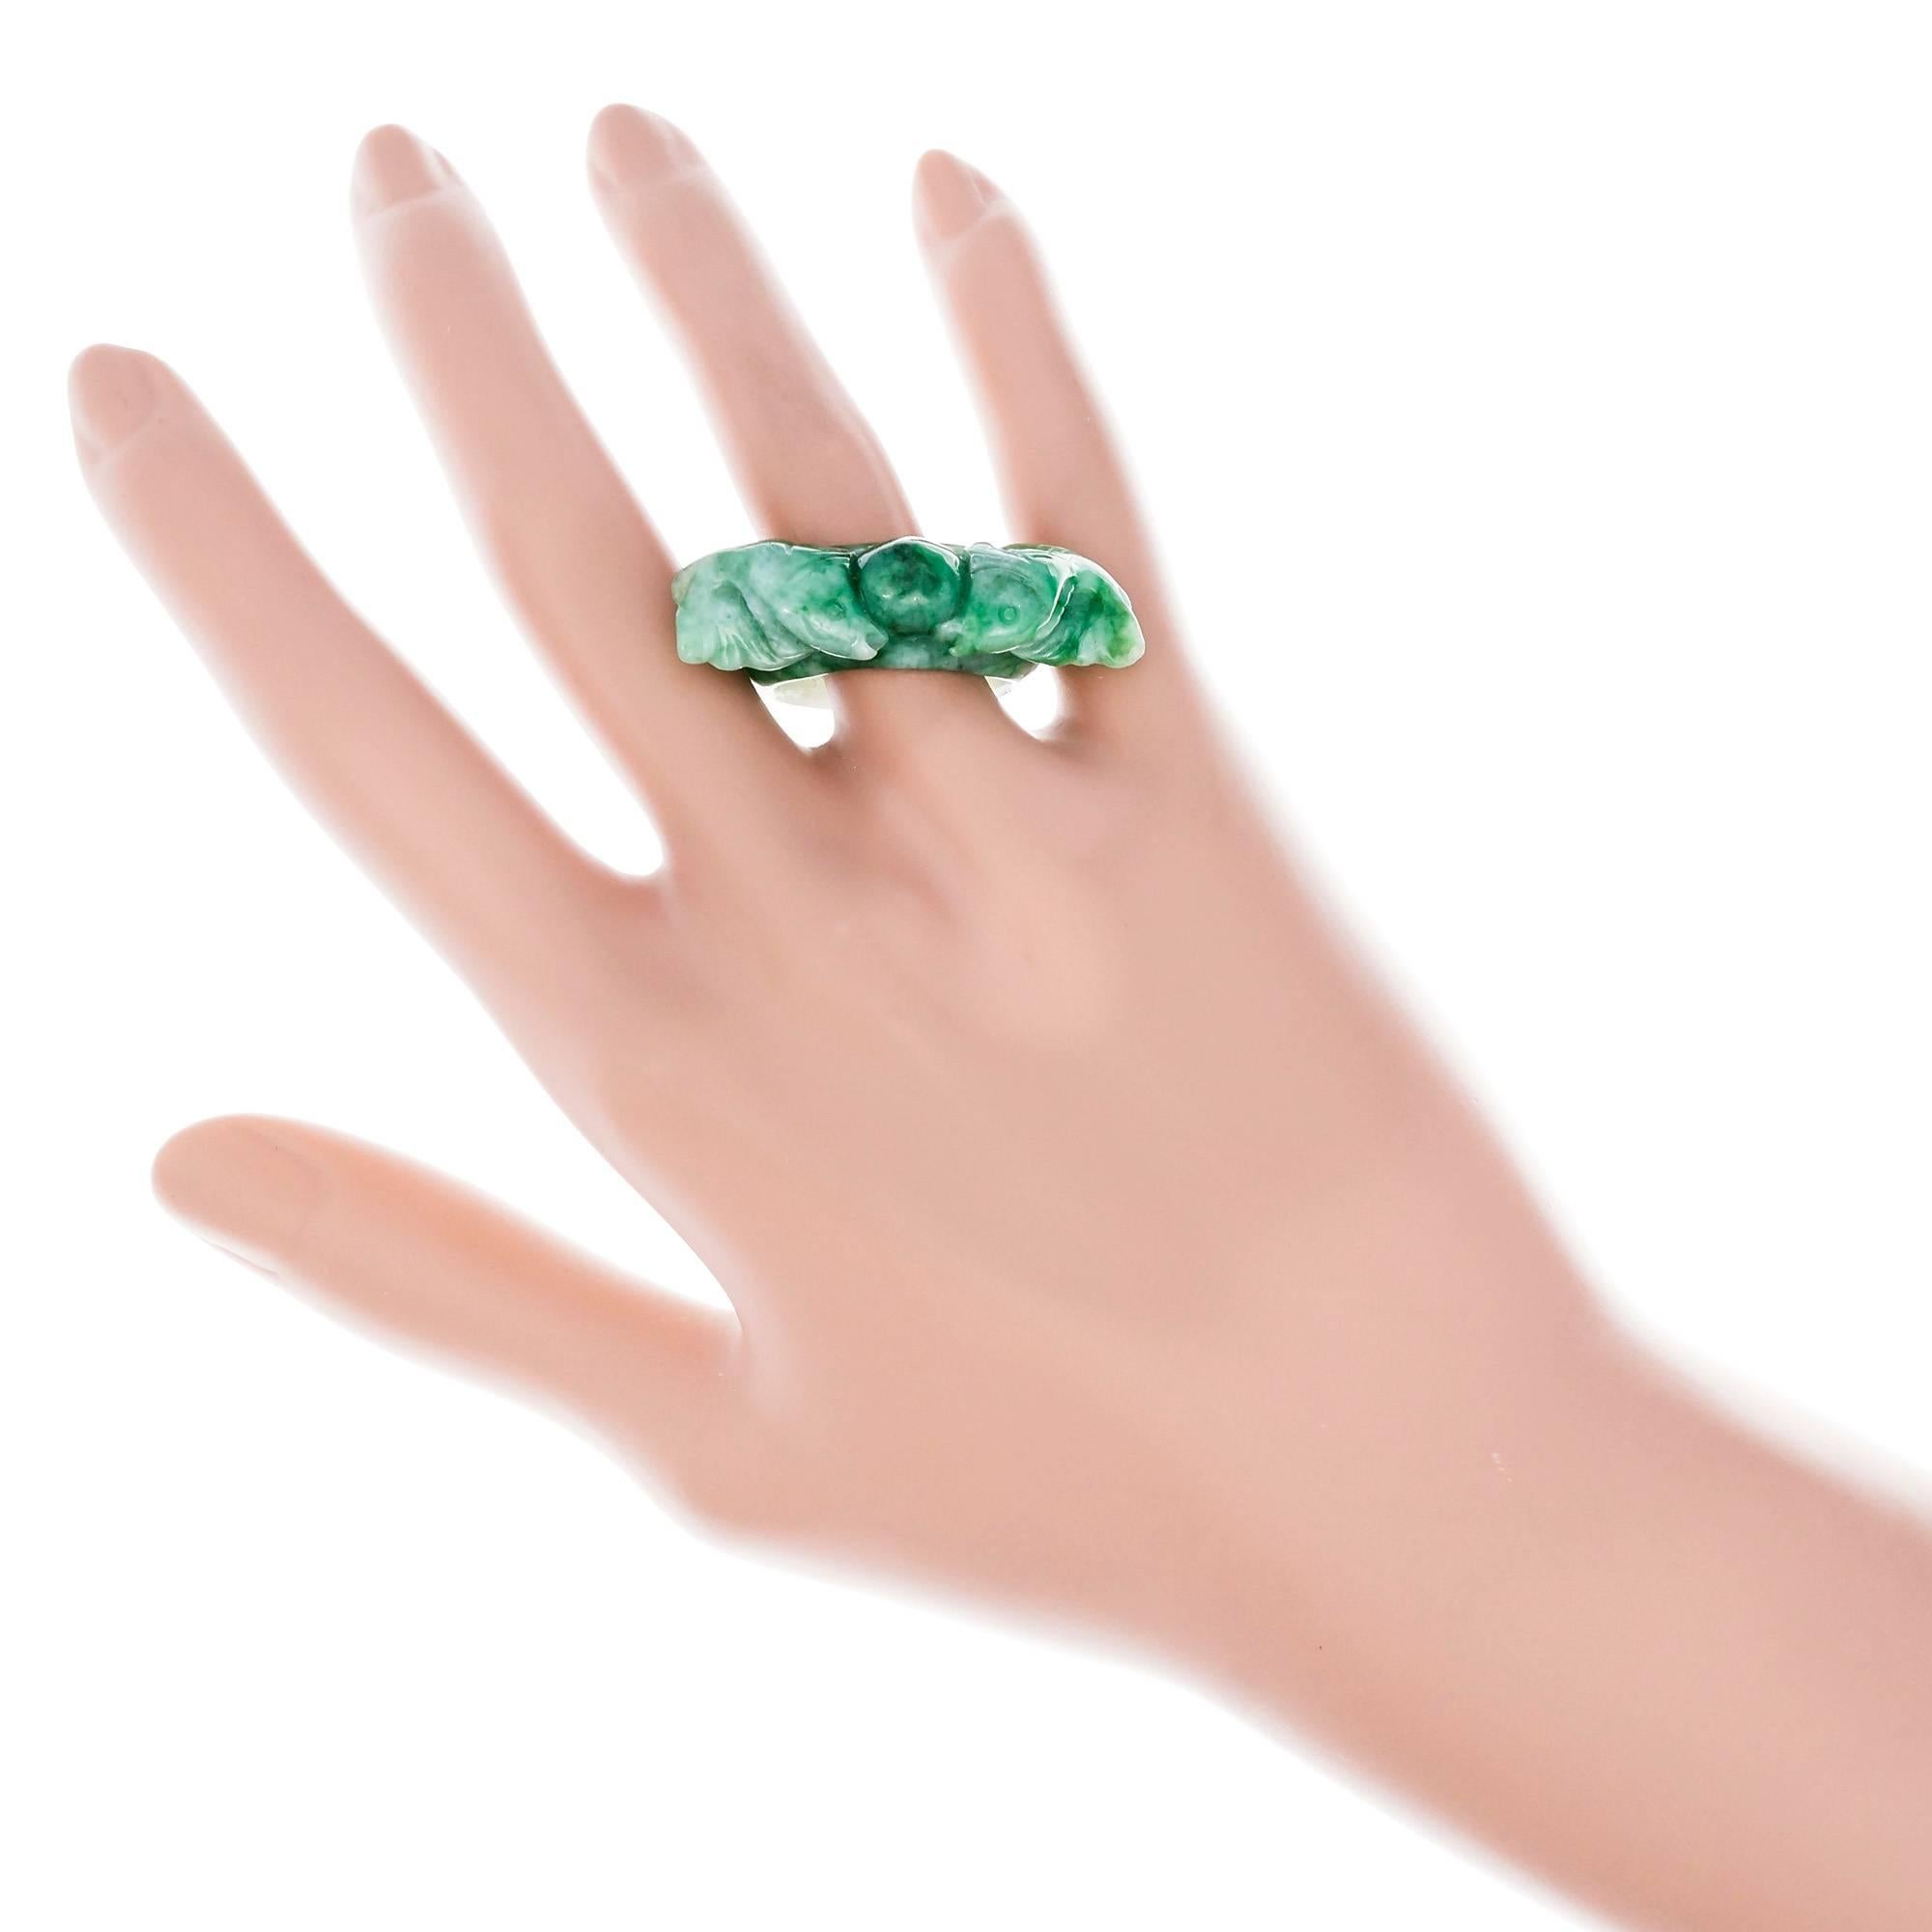 Natural bright mottled or blended green double fish Jadeite Jade across the finger ring. GIA certified natural untreated Jadeite Jade. 

1 carved mottle green translucent Jadeite Jade, approx. total weight 10.57cts, GIA certificate #2185600510
Width